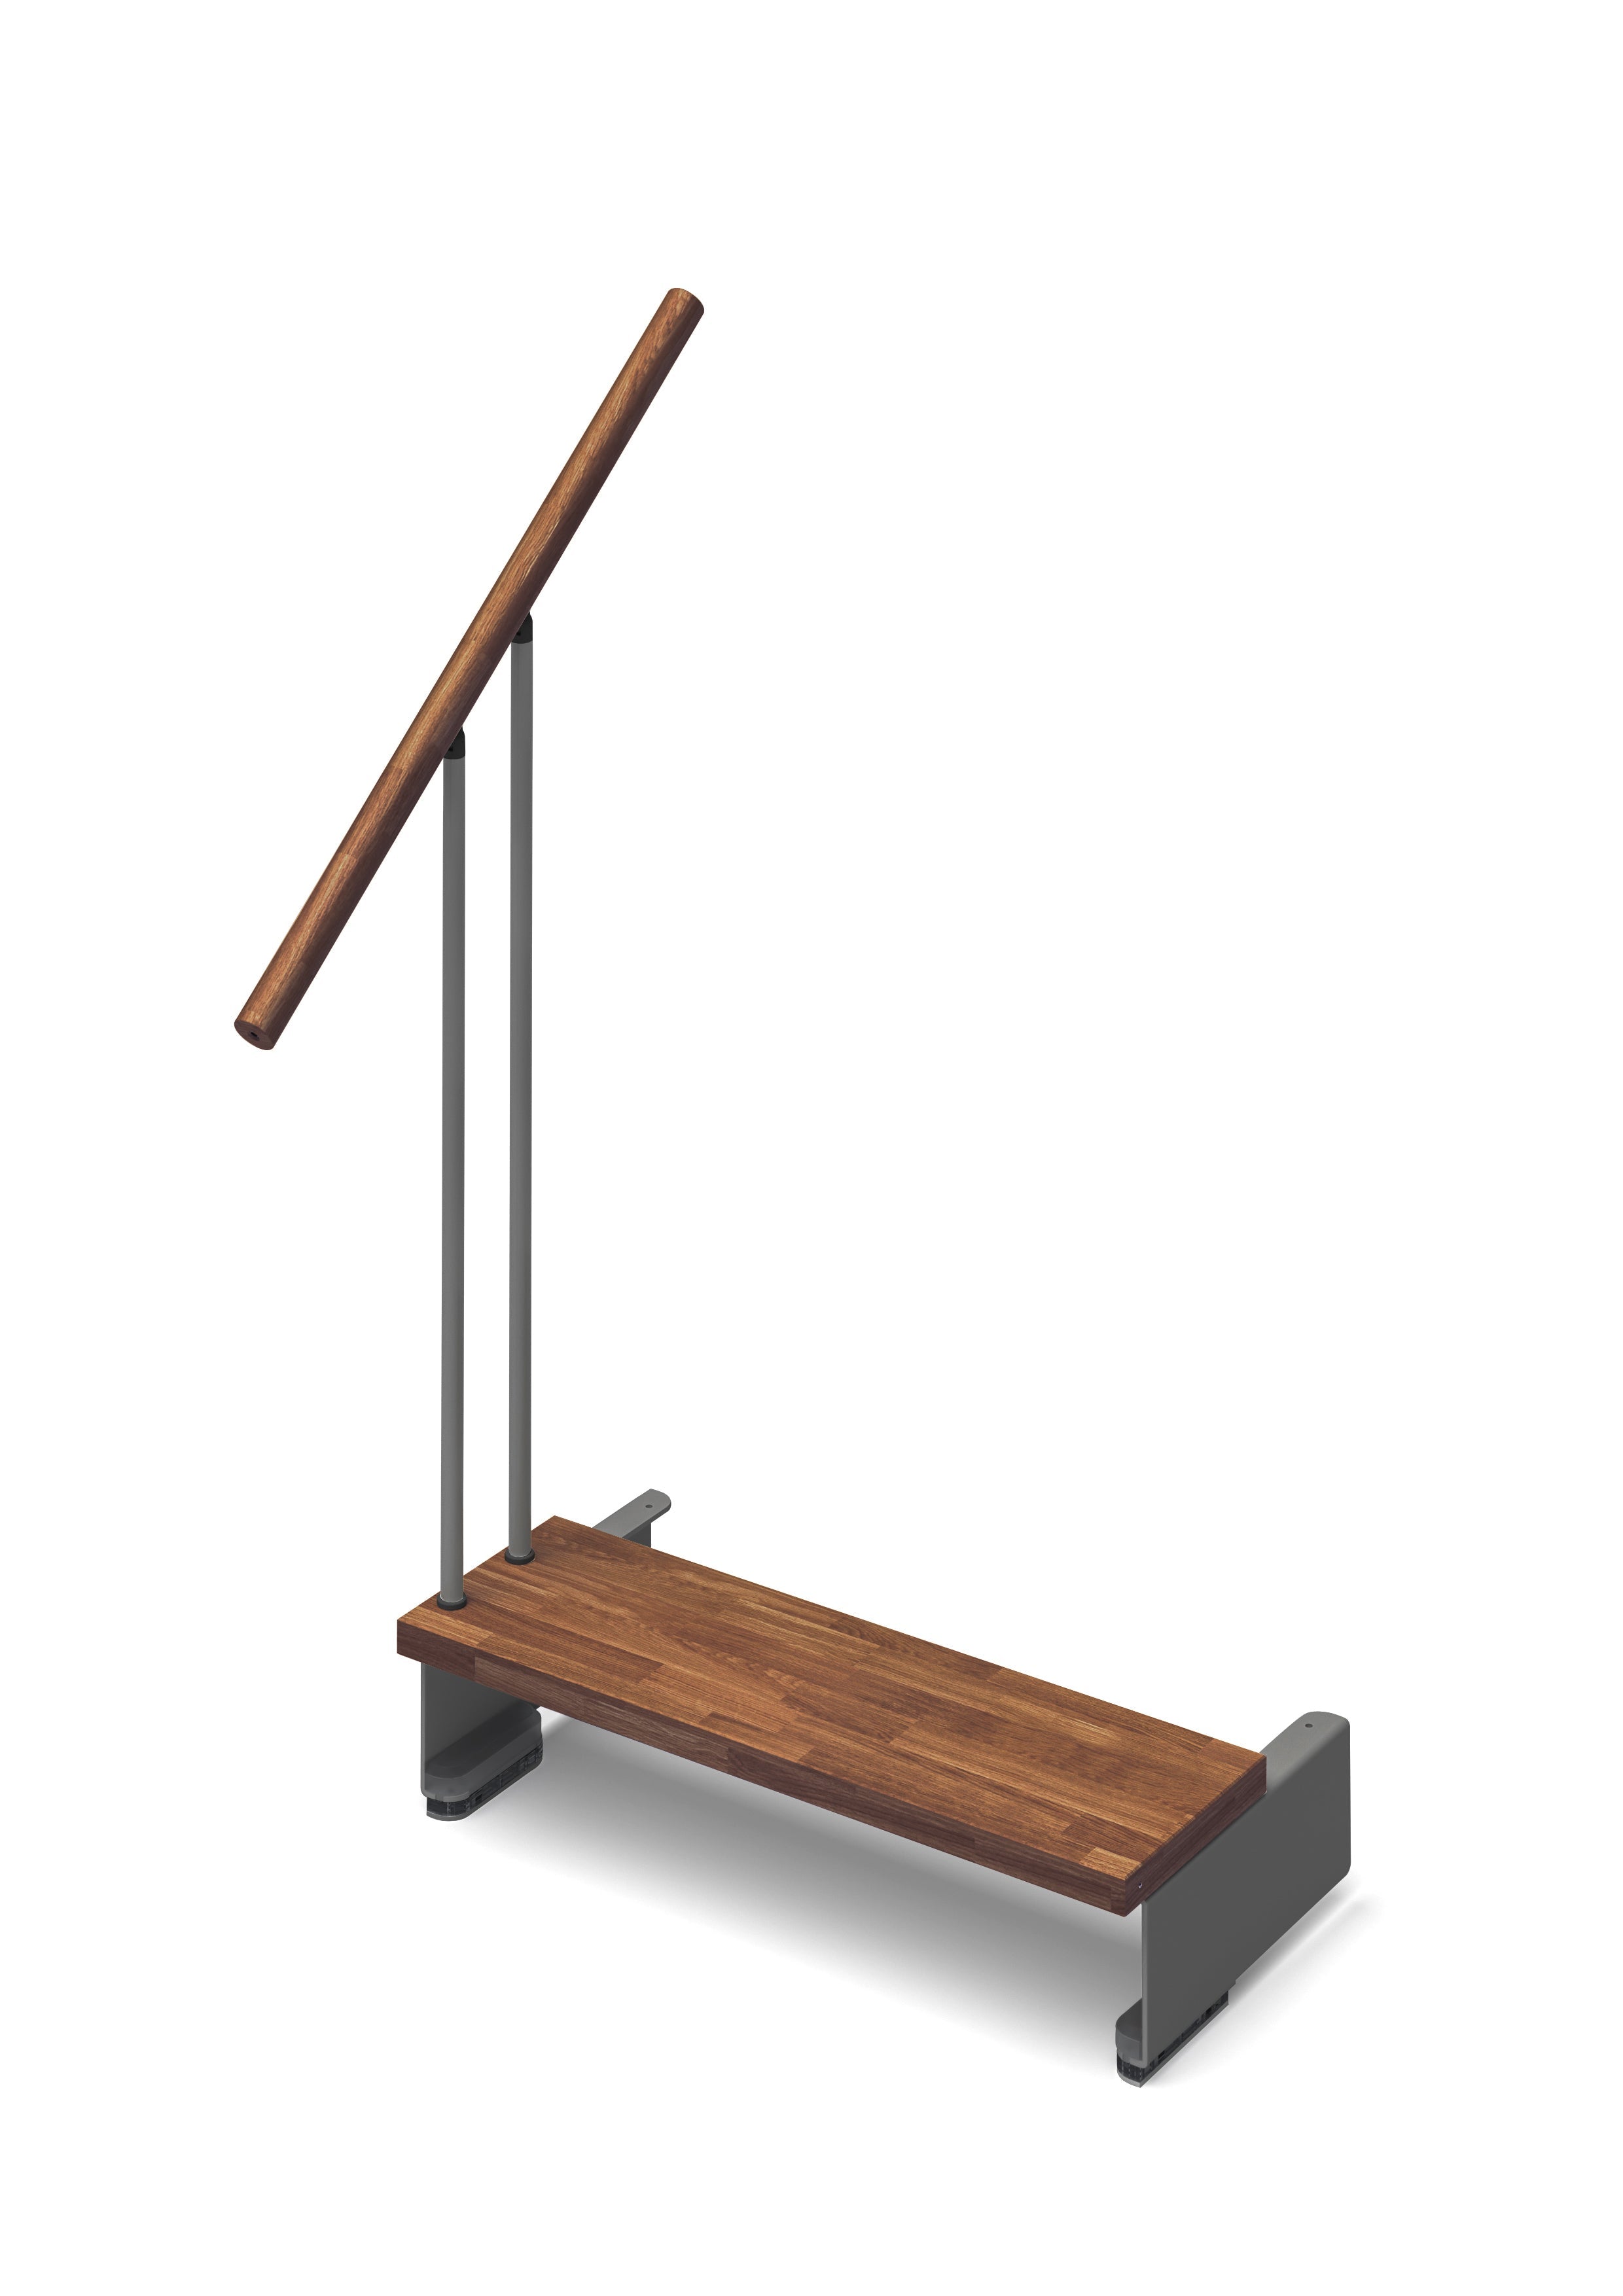 Additional step Adapta 94cm (with structure and railing) - Walnut 25